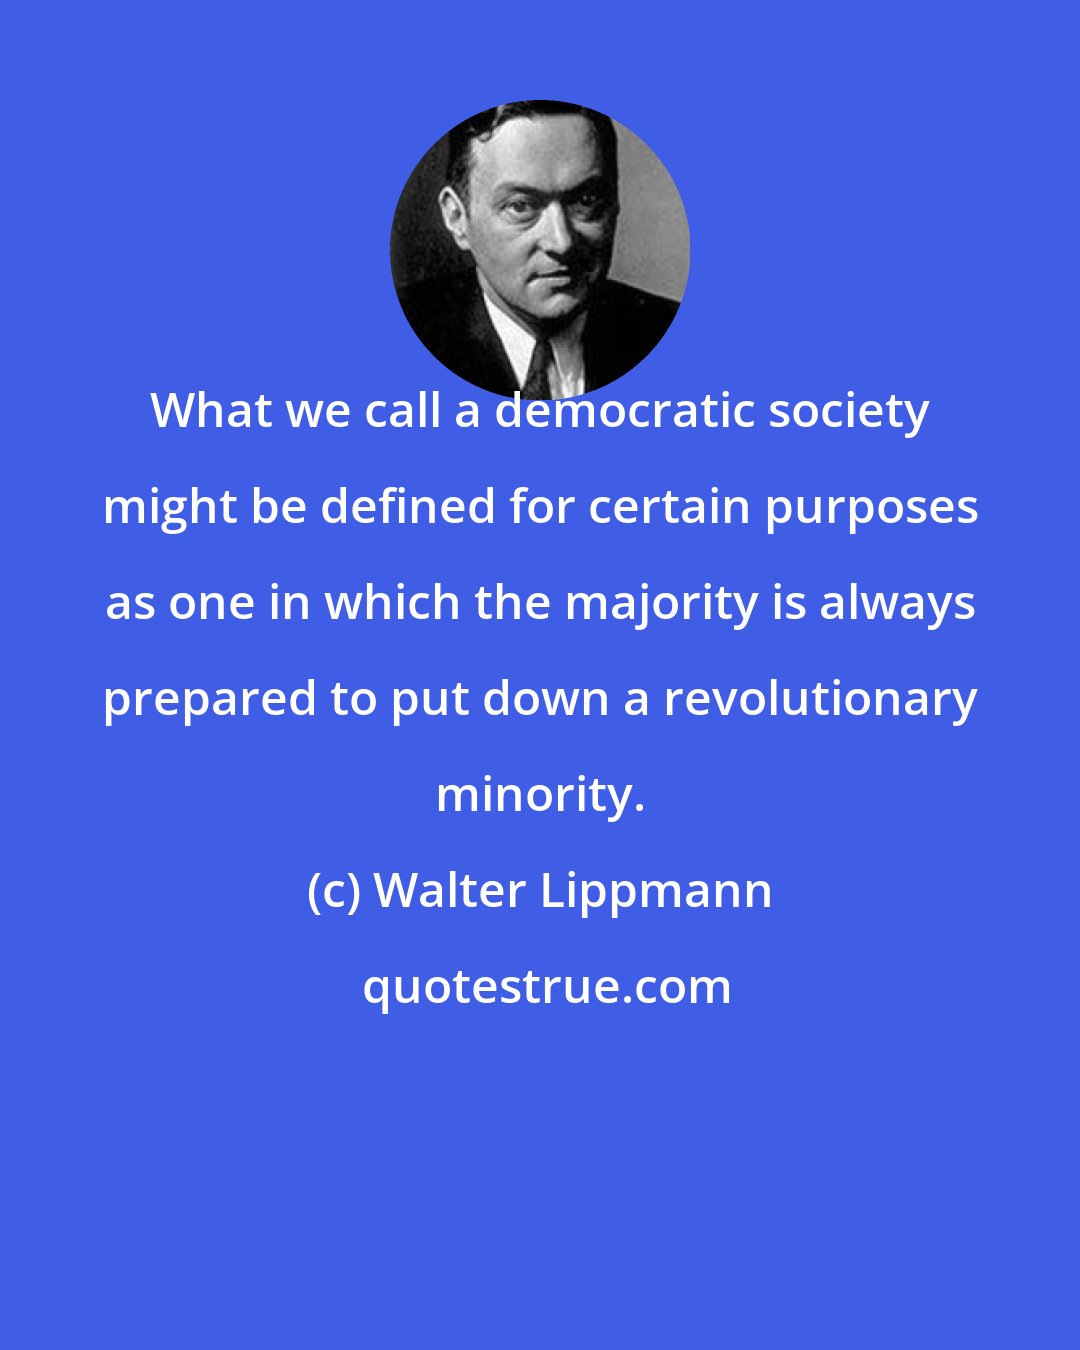 Walter Lippmann: What we call a democratic society might be defined for certain purposes as one in which the majority is always prepared to put down a revolutionary minority.